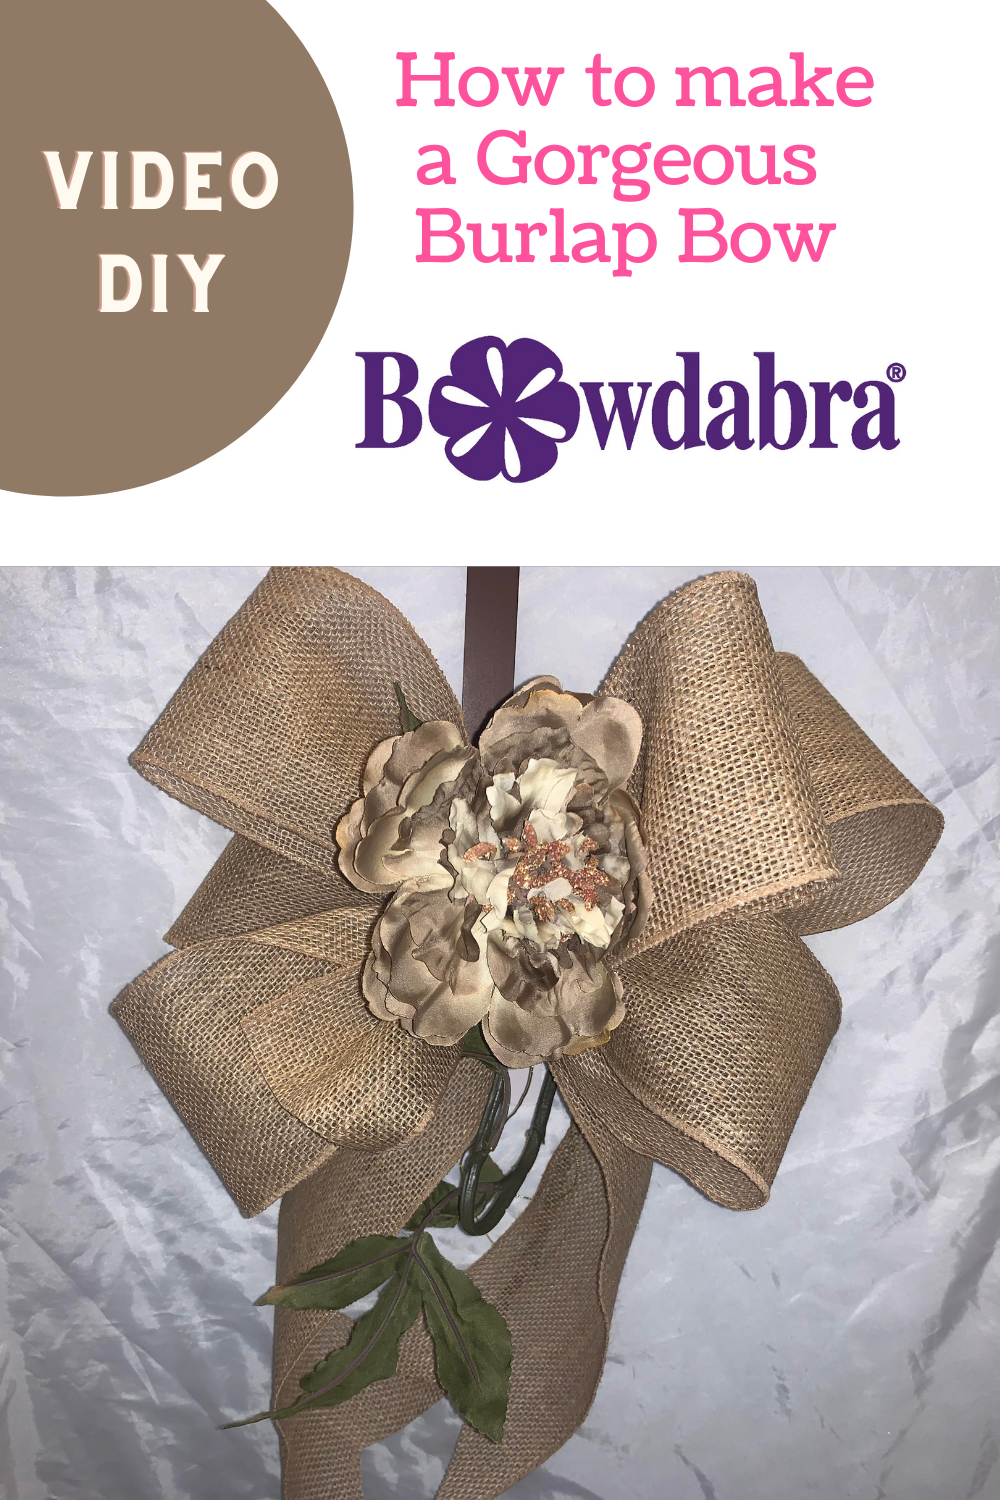 How to make easy DIY bows and wreaths – Bowdabra Tutorial